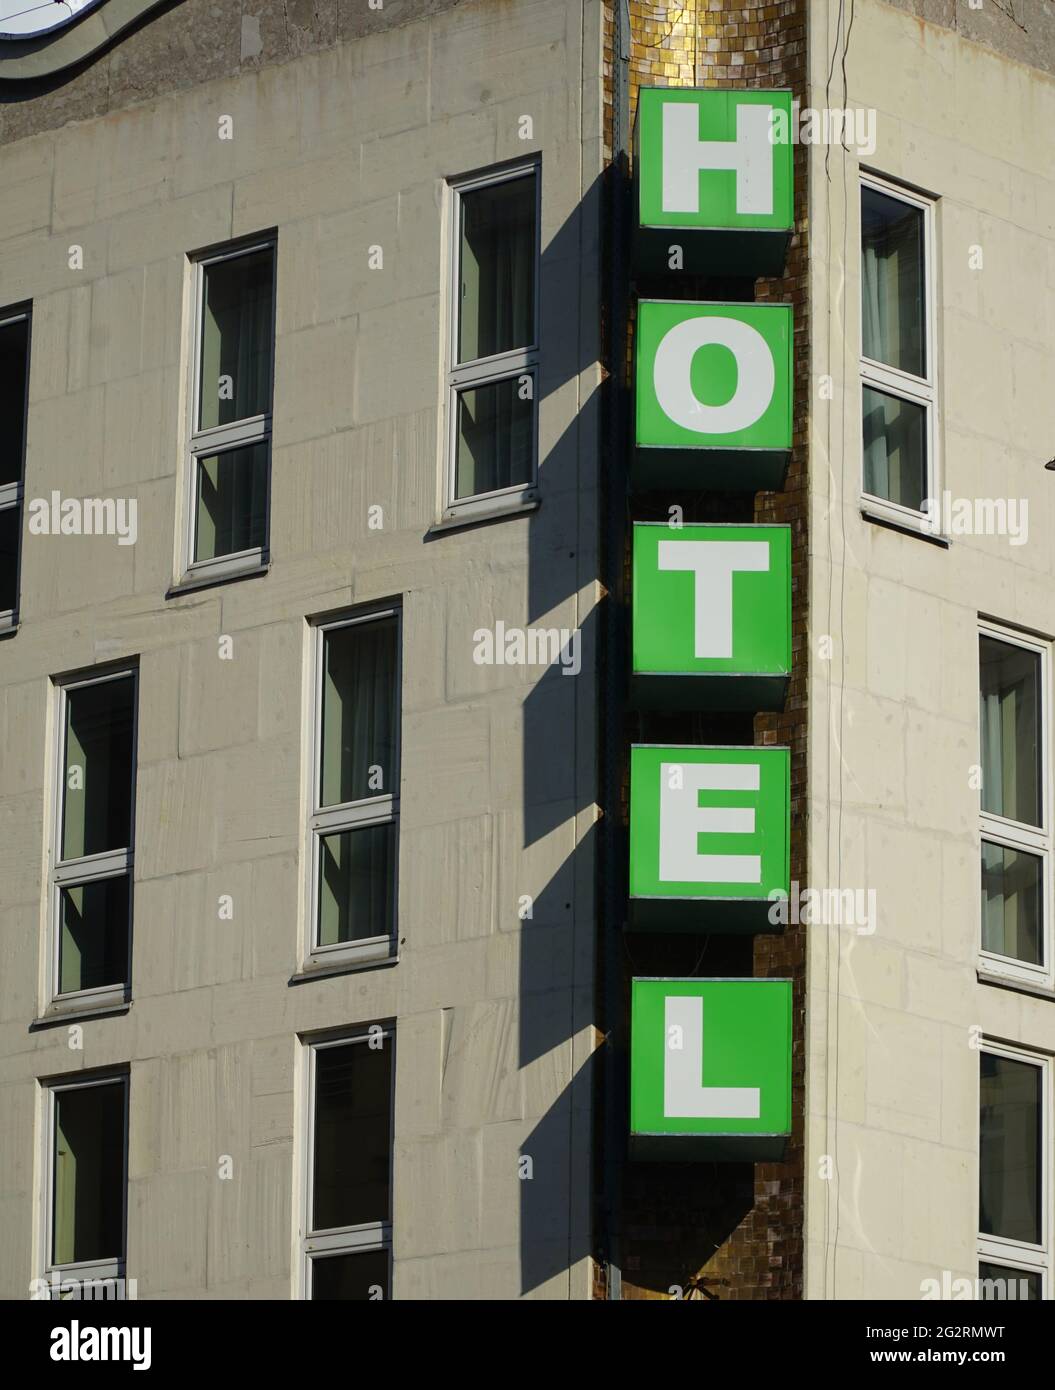 Vertical Hotel signboard over the entrance to the building. Vertical green hotel sign mounted on beige facade of hotel. White letters on green cubes. Stock Photo